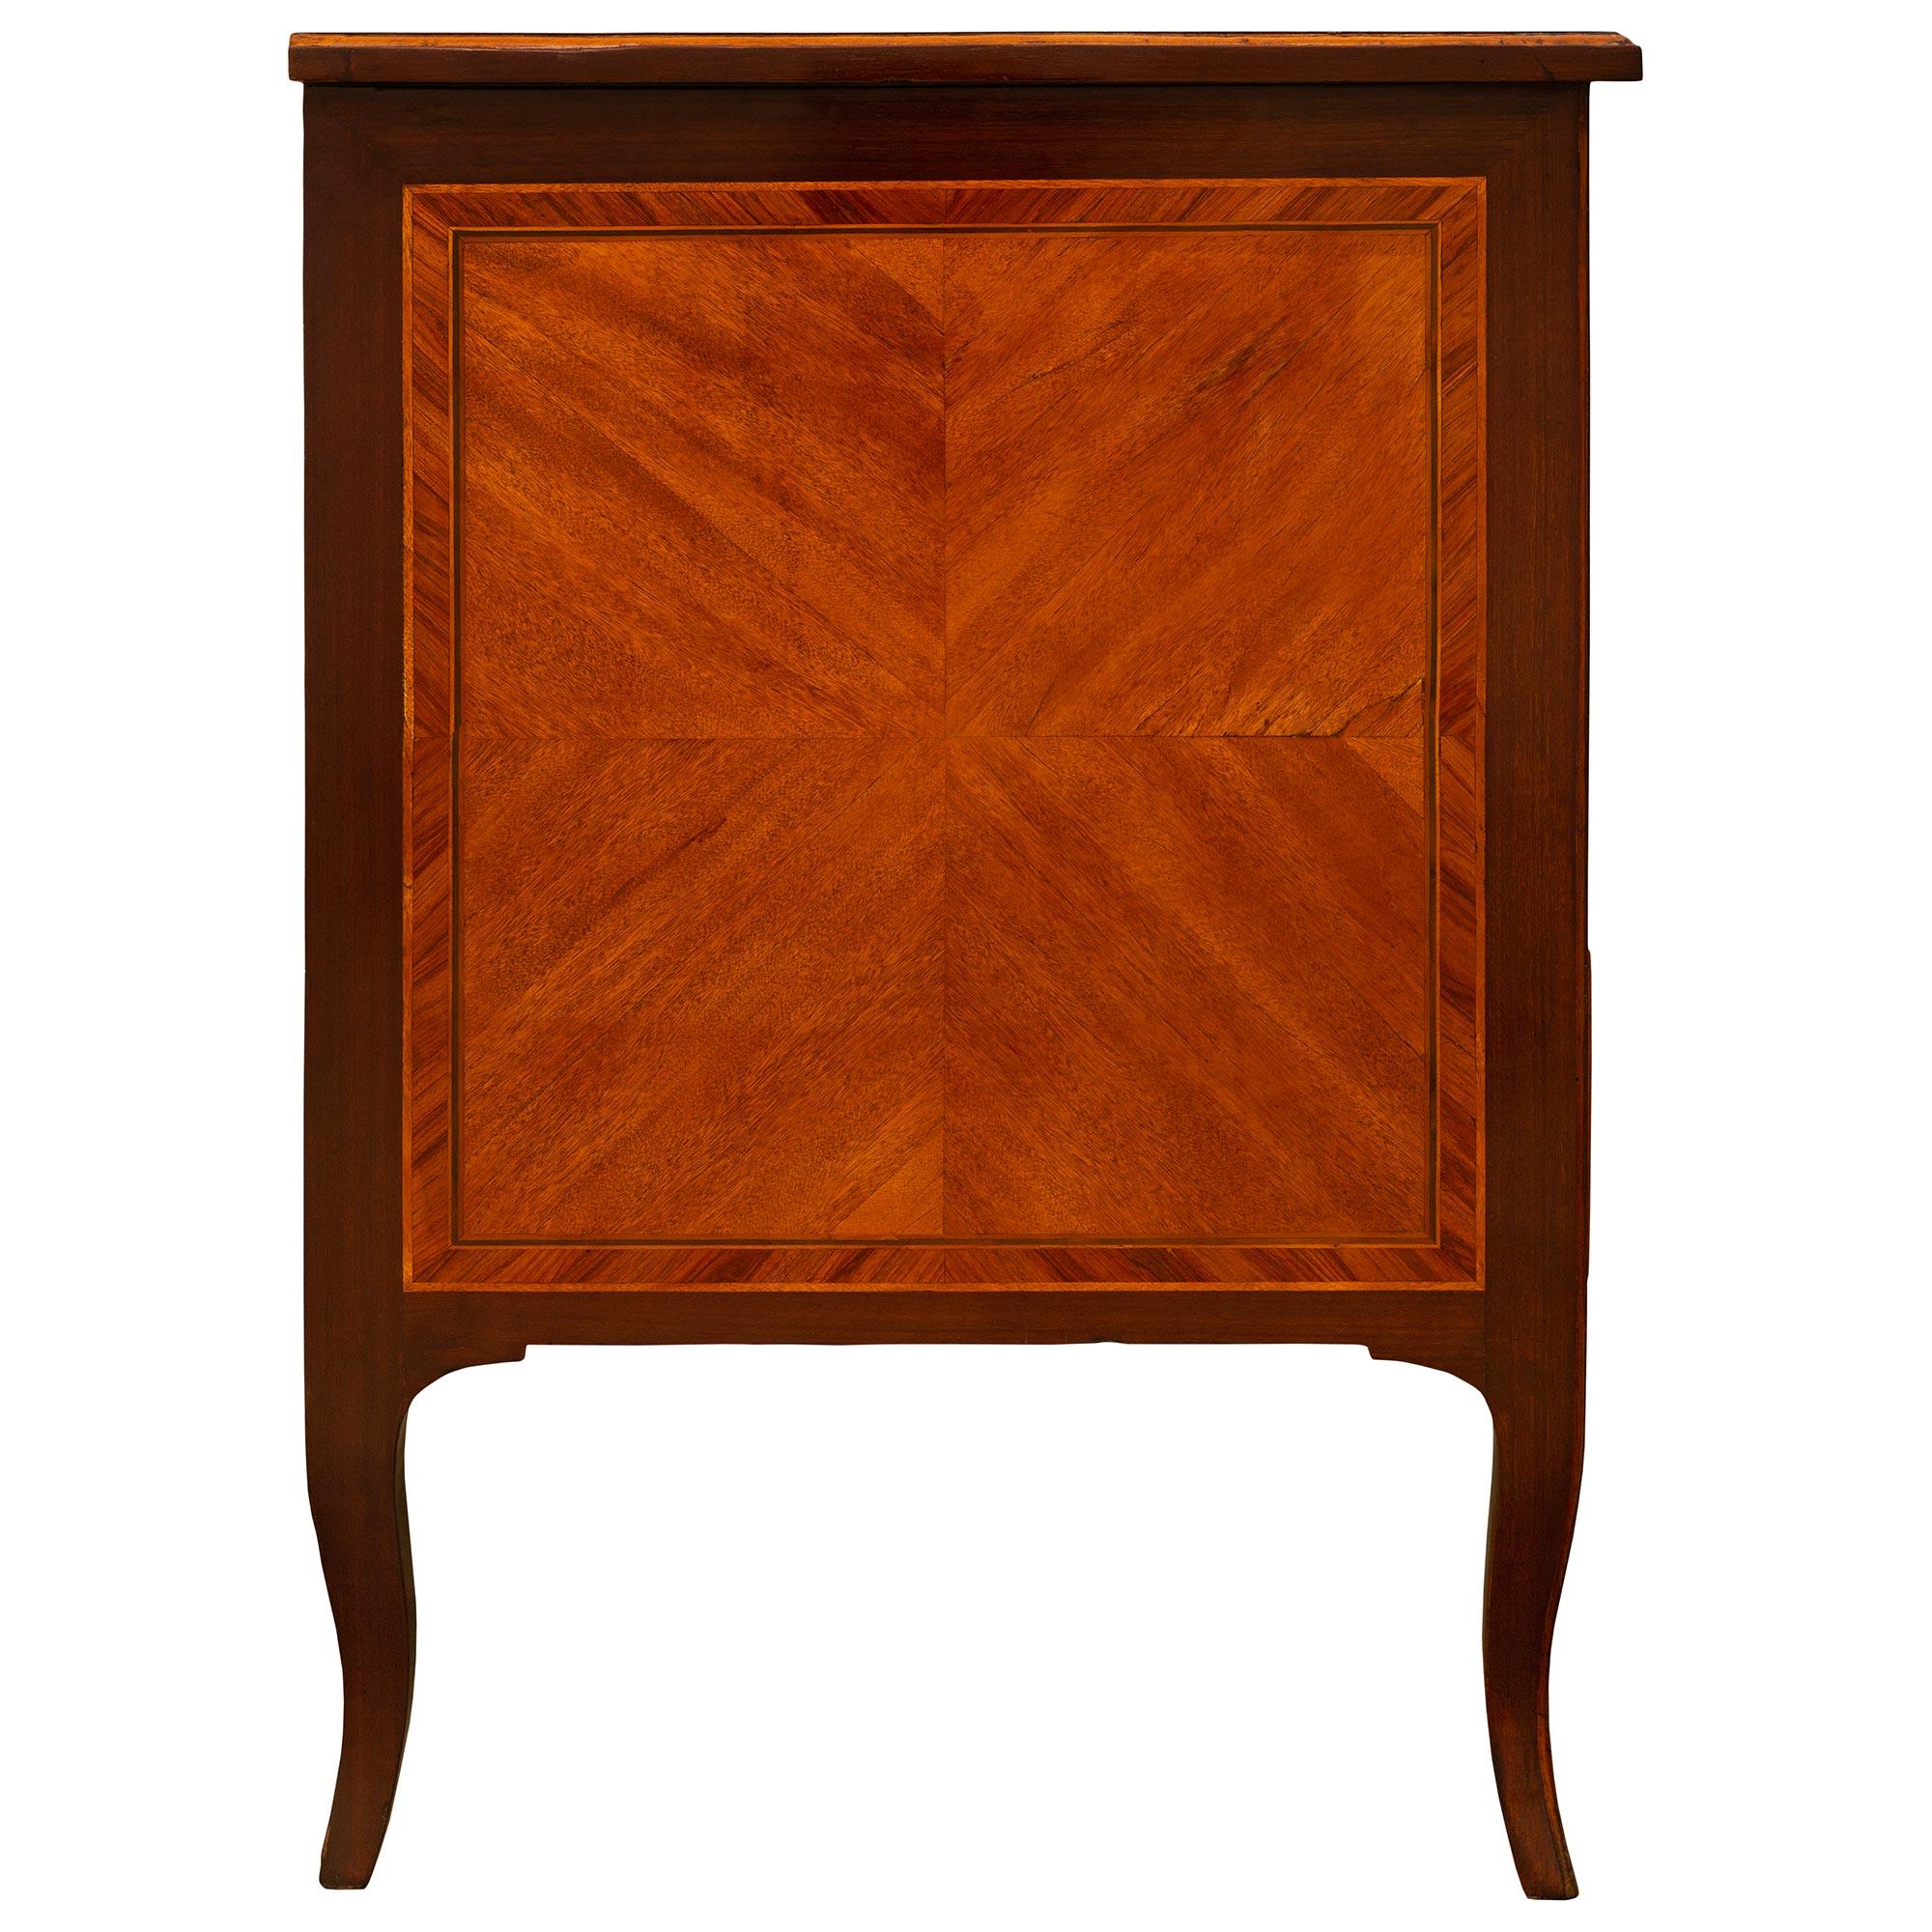 Italian Transitional Period Mahogany, Tulipwood, Cherrywood And Ormolu Commode For Sale 1